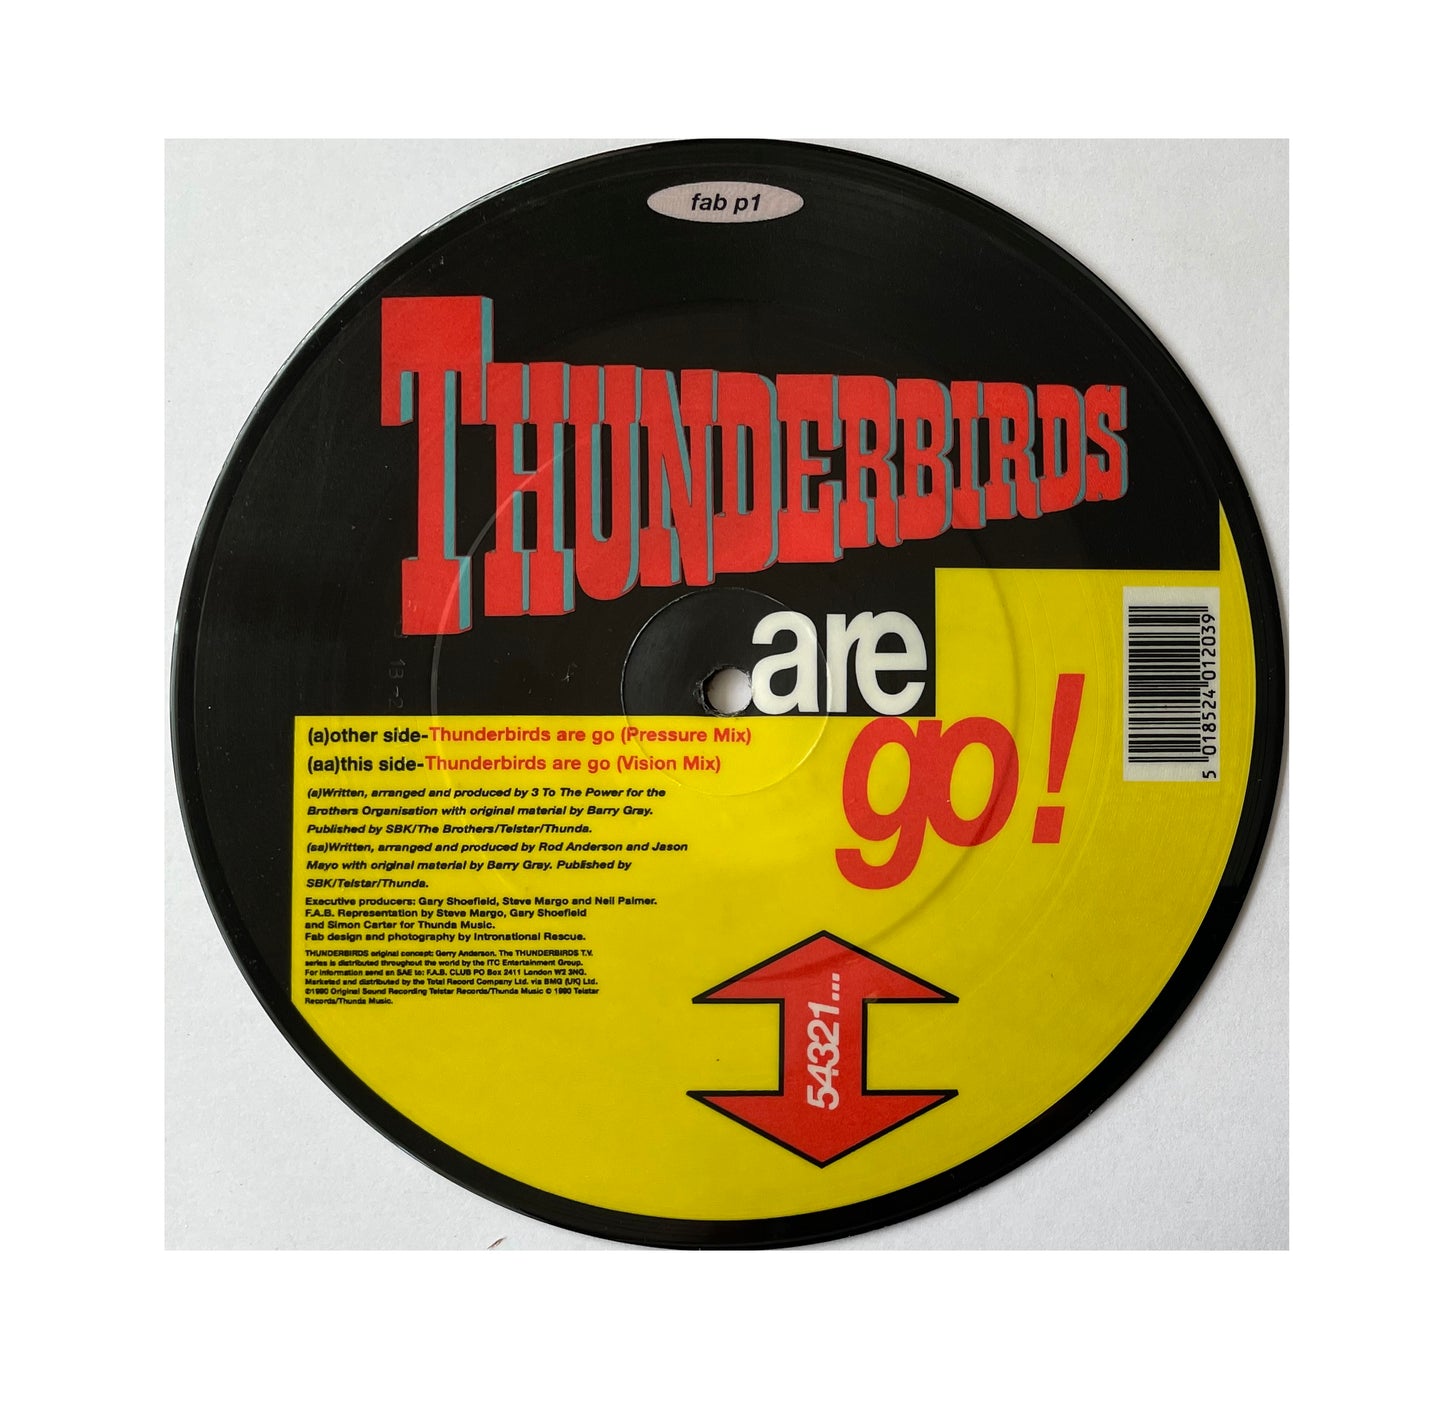 Vintage 1990 Thunderbirds Are Go F.A.B. Featuring MC Parker - 7 Inch Vinyl Record Picture Disc - Shop Stock Room Find